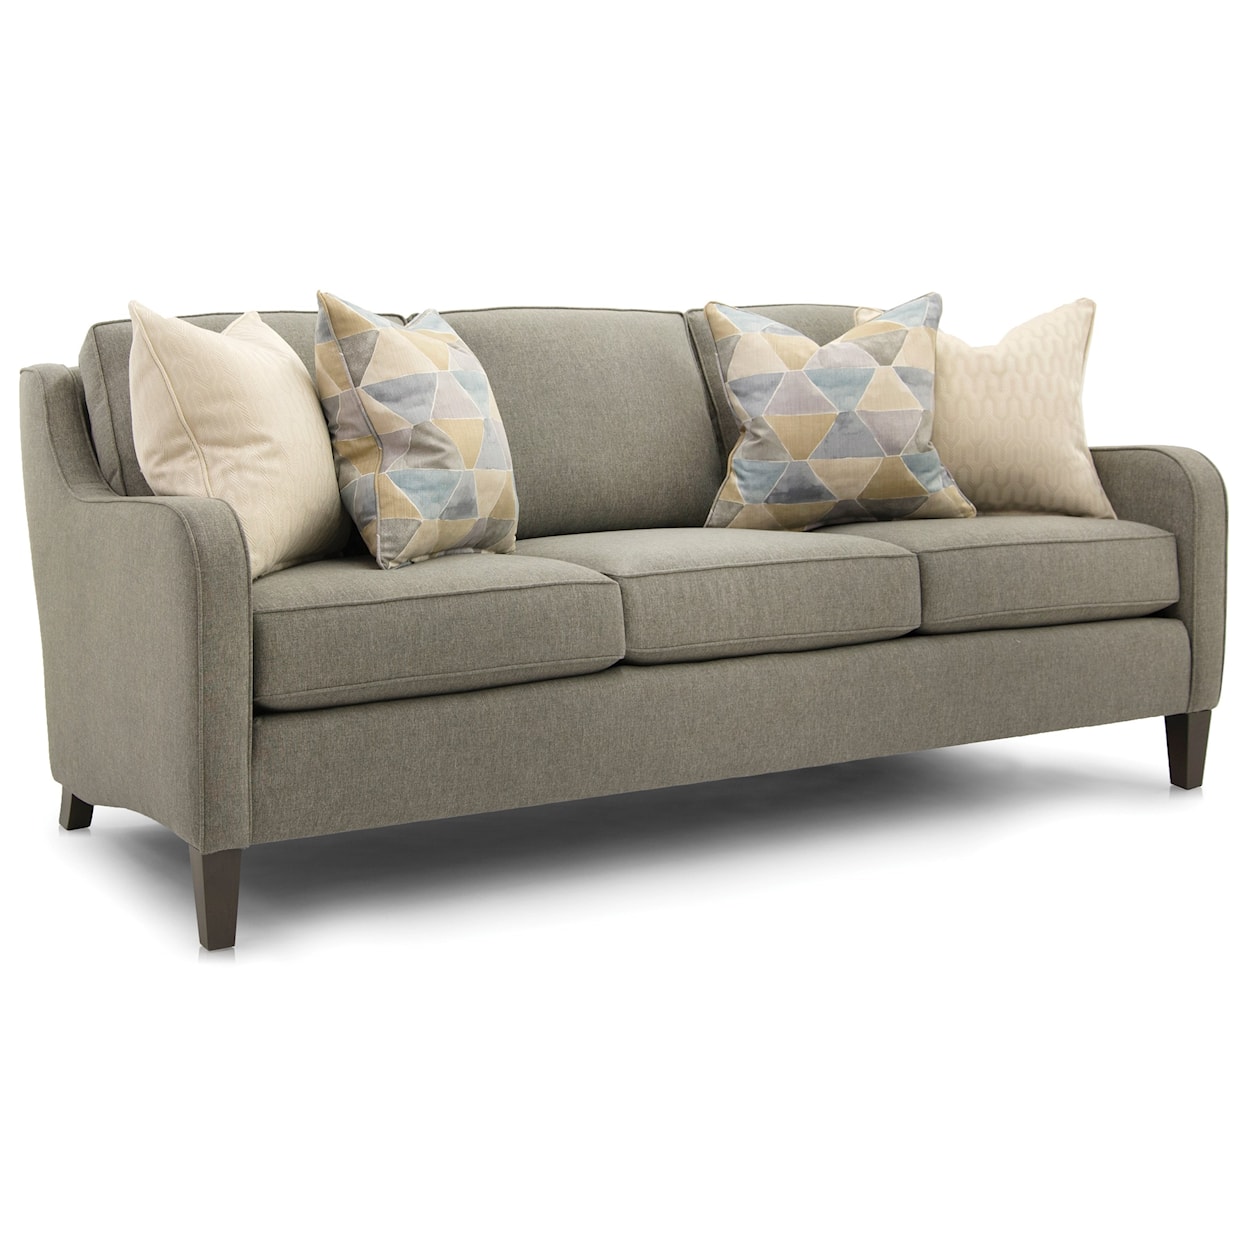 Smith Brothers 252 Full Size Sofa